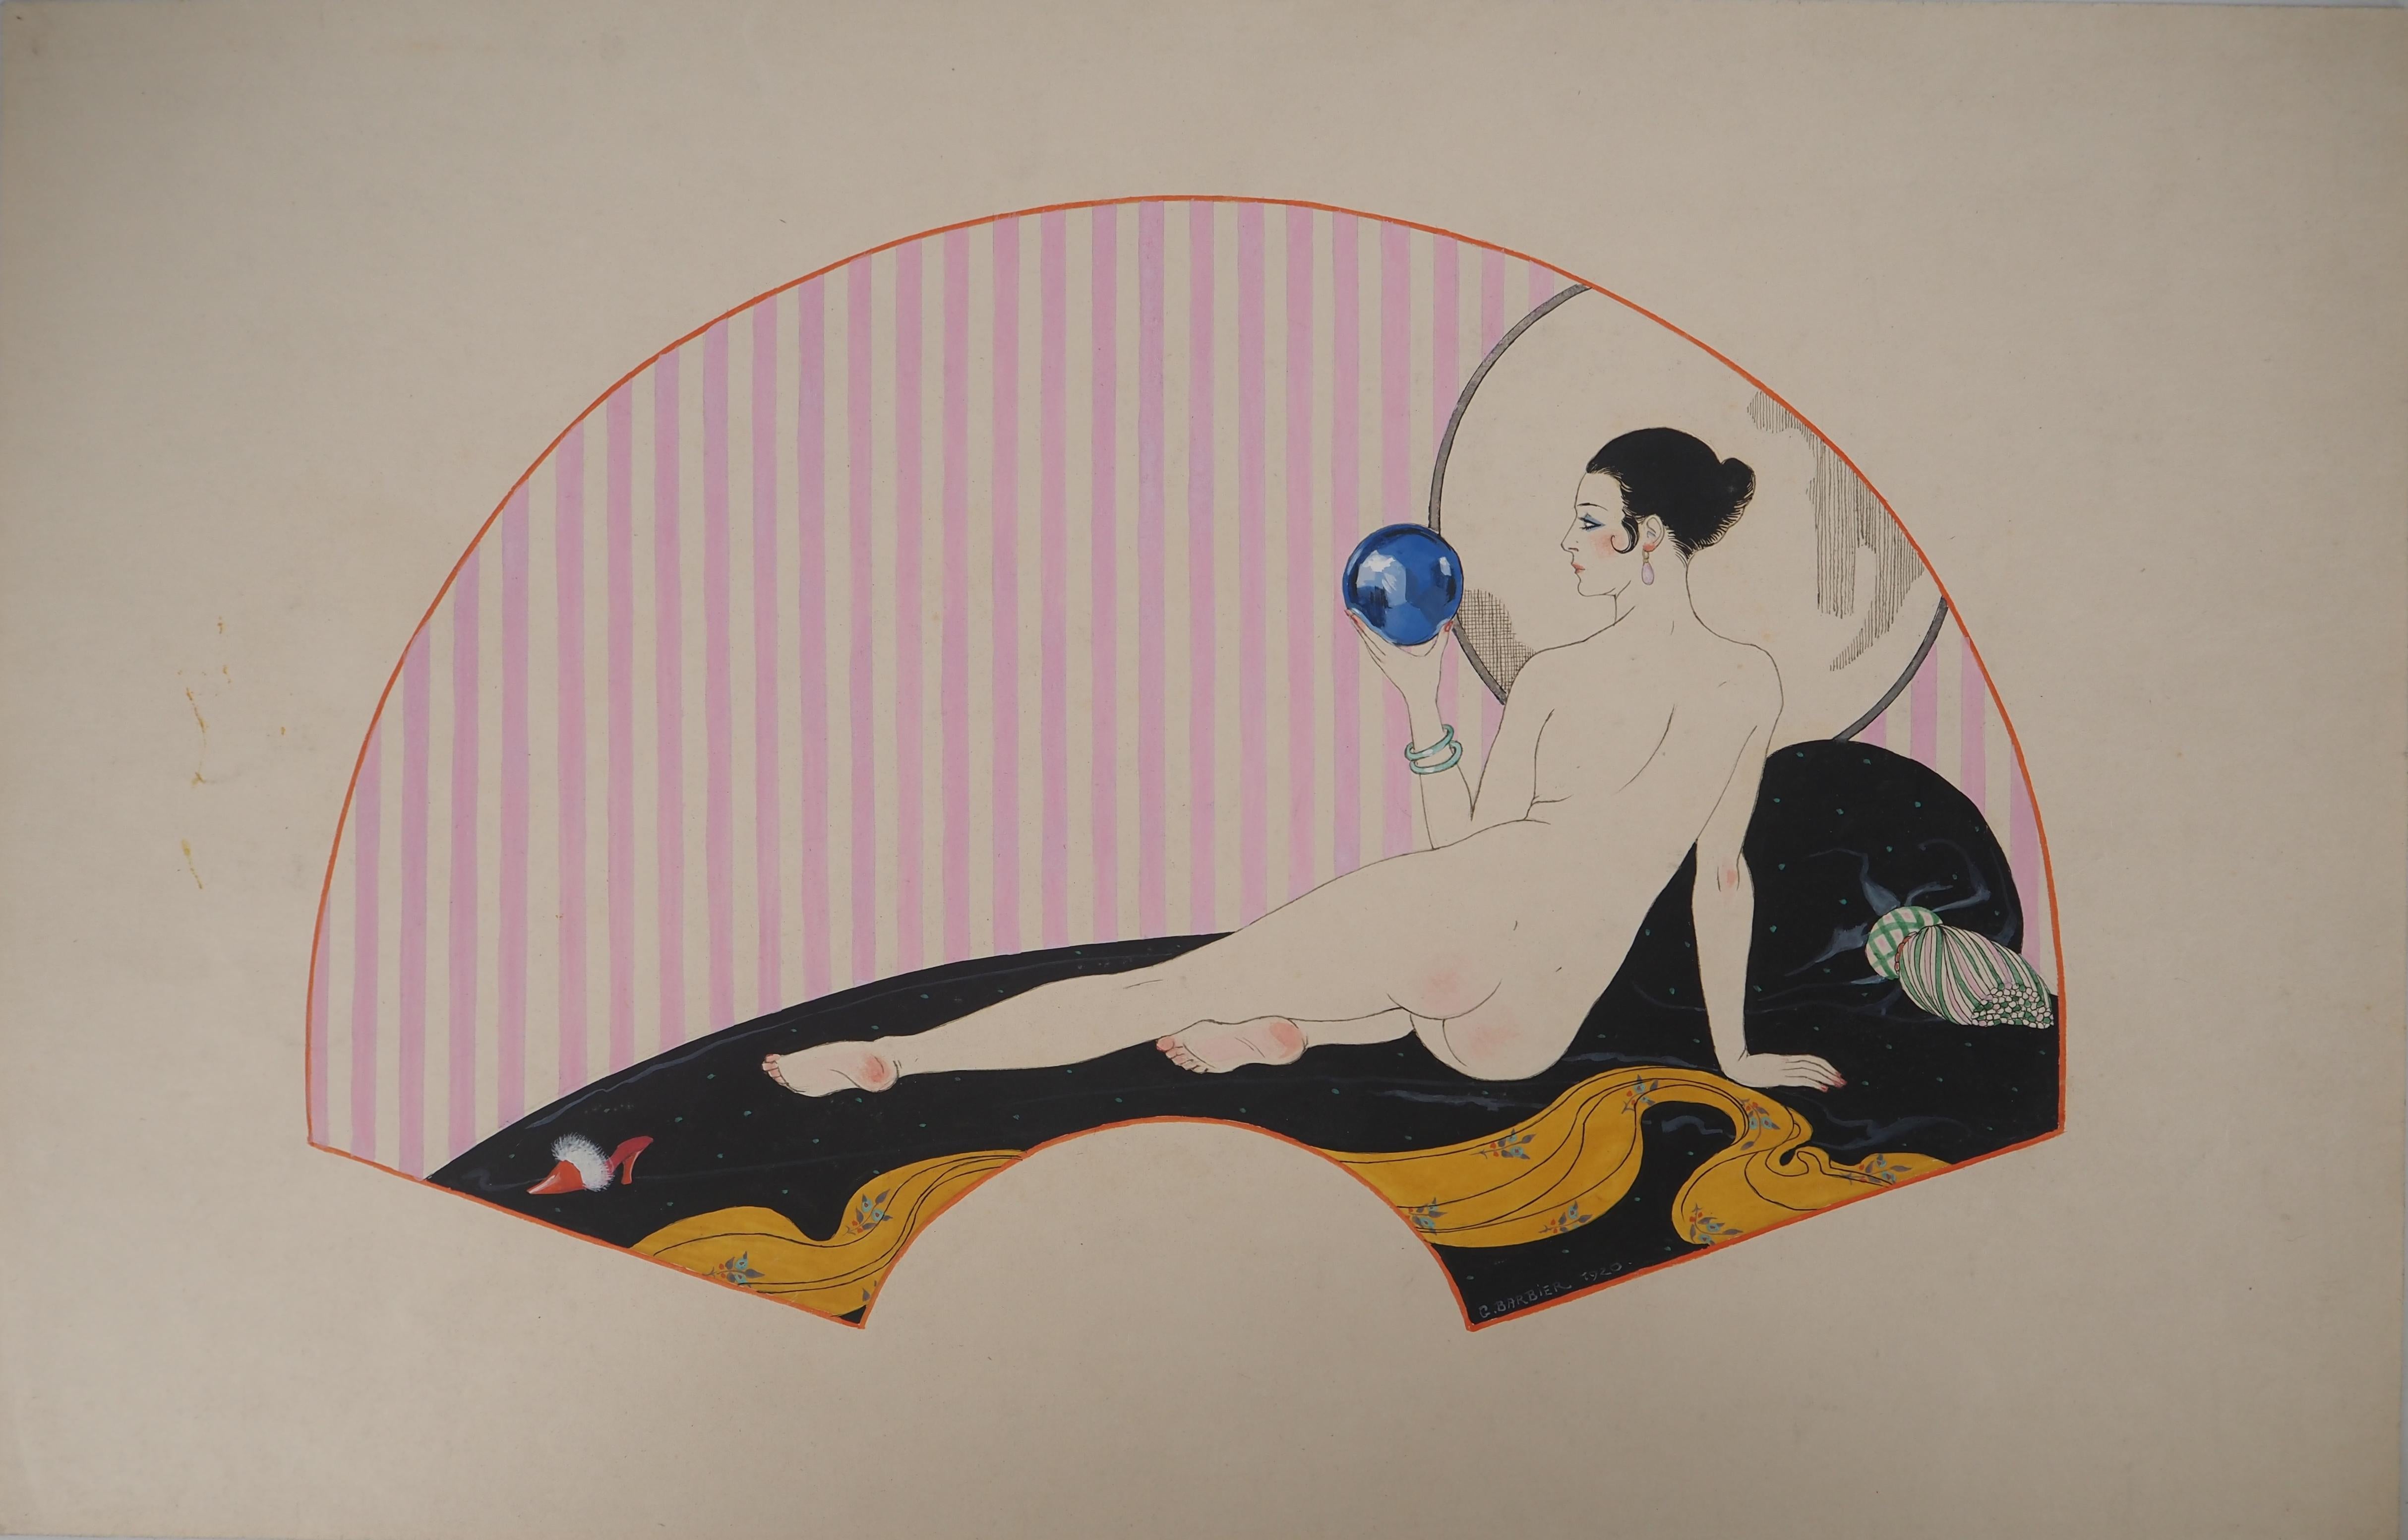 Georges BARBIER
Art Nouveau : Nude with Crystal Ball 

Original India Ink, Watercolor and Gouache painting
Signed in the bottom middle
On paper 32 x 50 cm (c. 13 x 20 in)
Presented in golden wood frame 35 x 53 cm ( c. 14 x 21 in)

Excellent